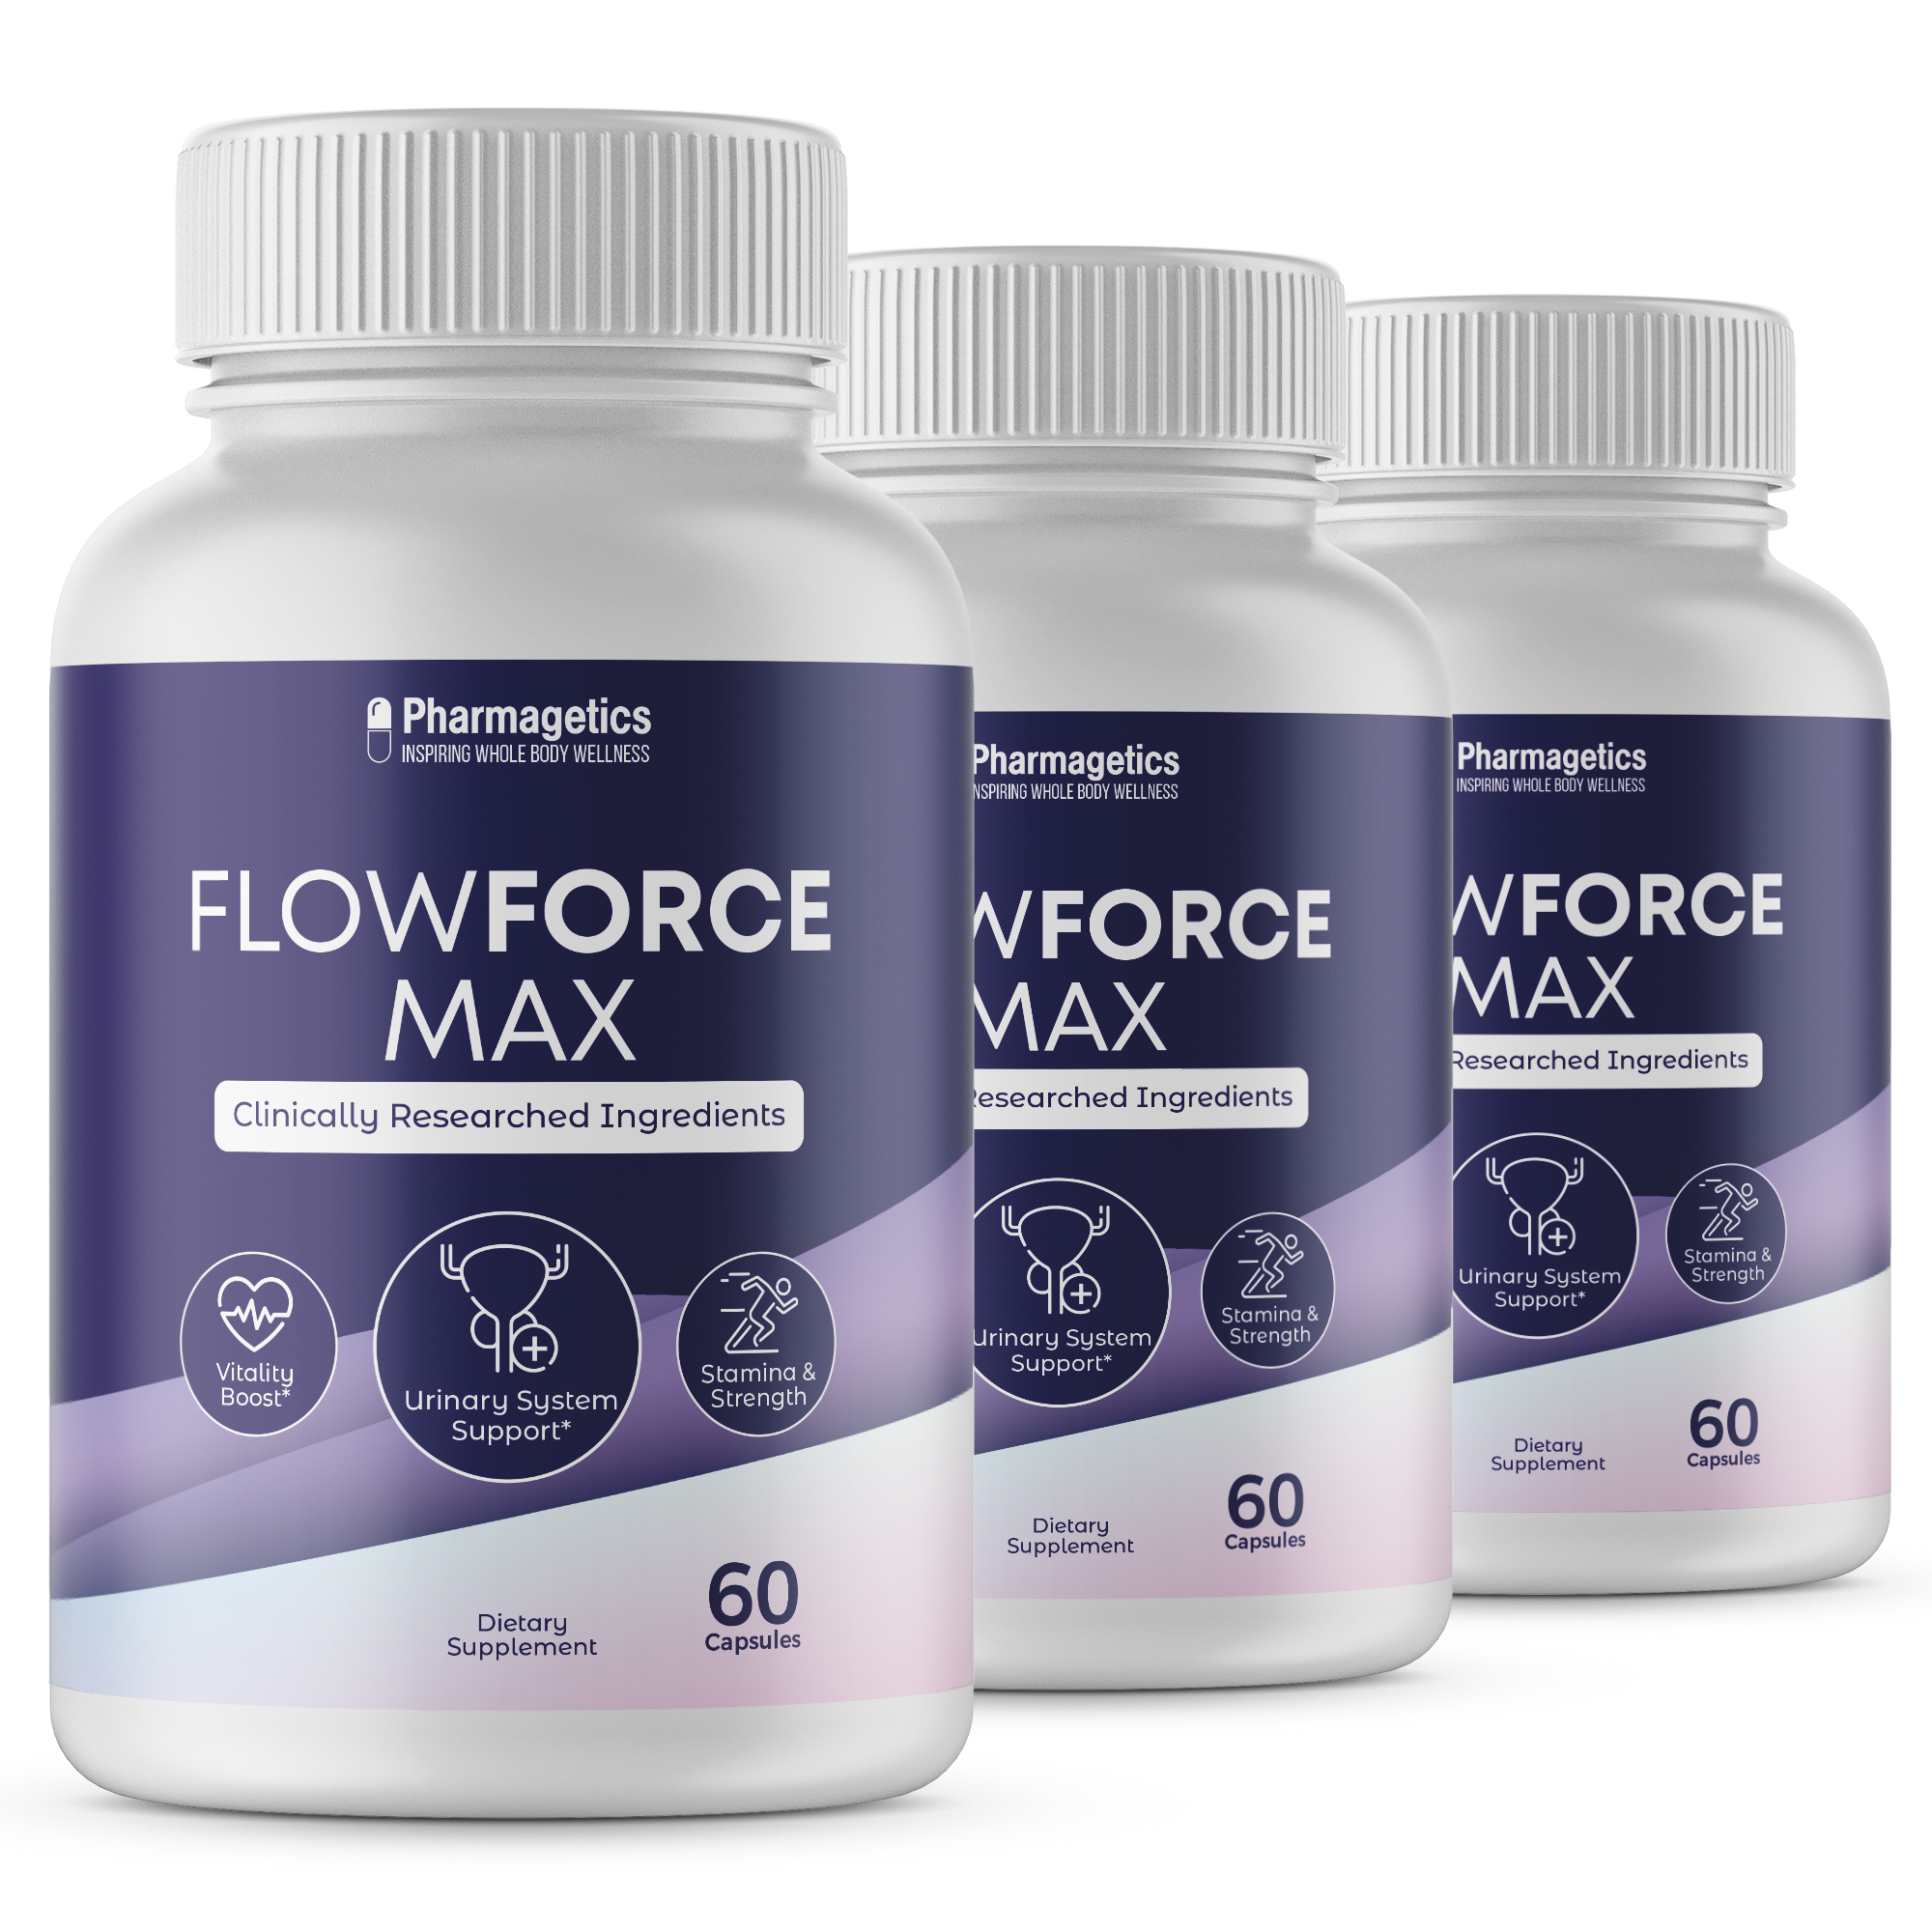 Flowforce Max Prostate Support Supplement Reduce Frequent Urination Flow Force Max - 3 Bottles